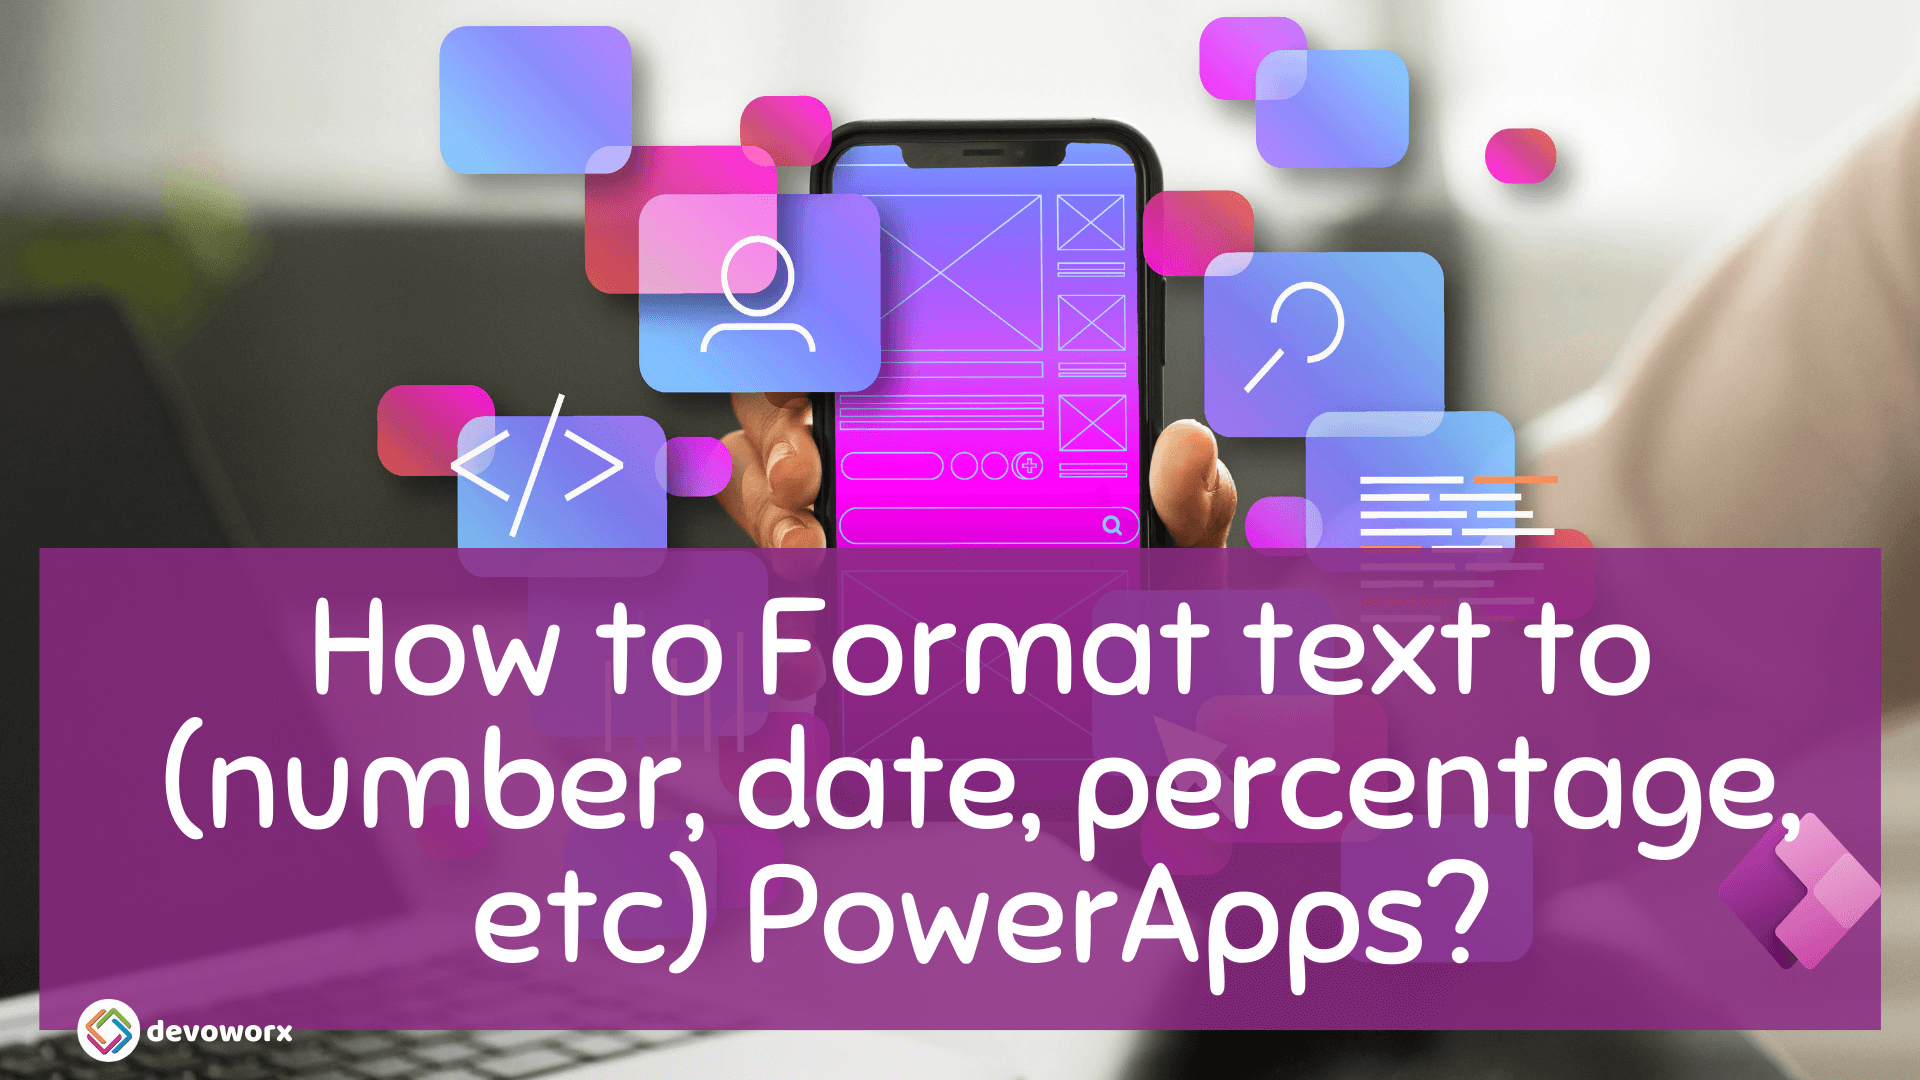 You are currently viewing How to Format Text in PowerApps? PowerApps convert text to other data types